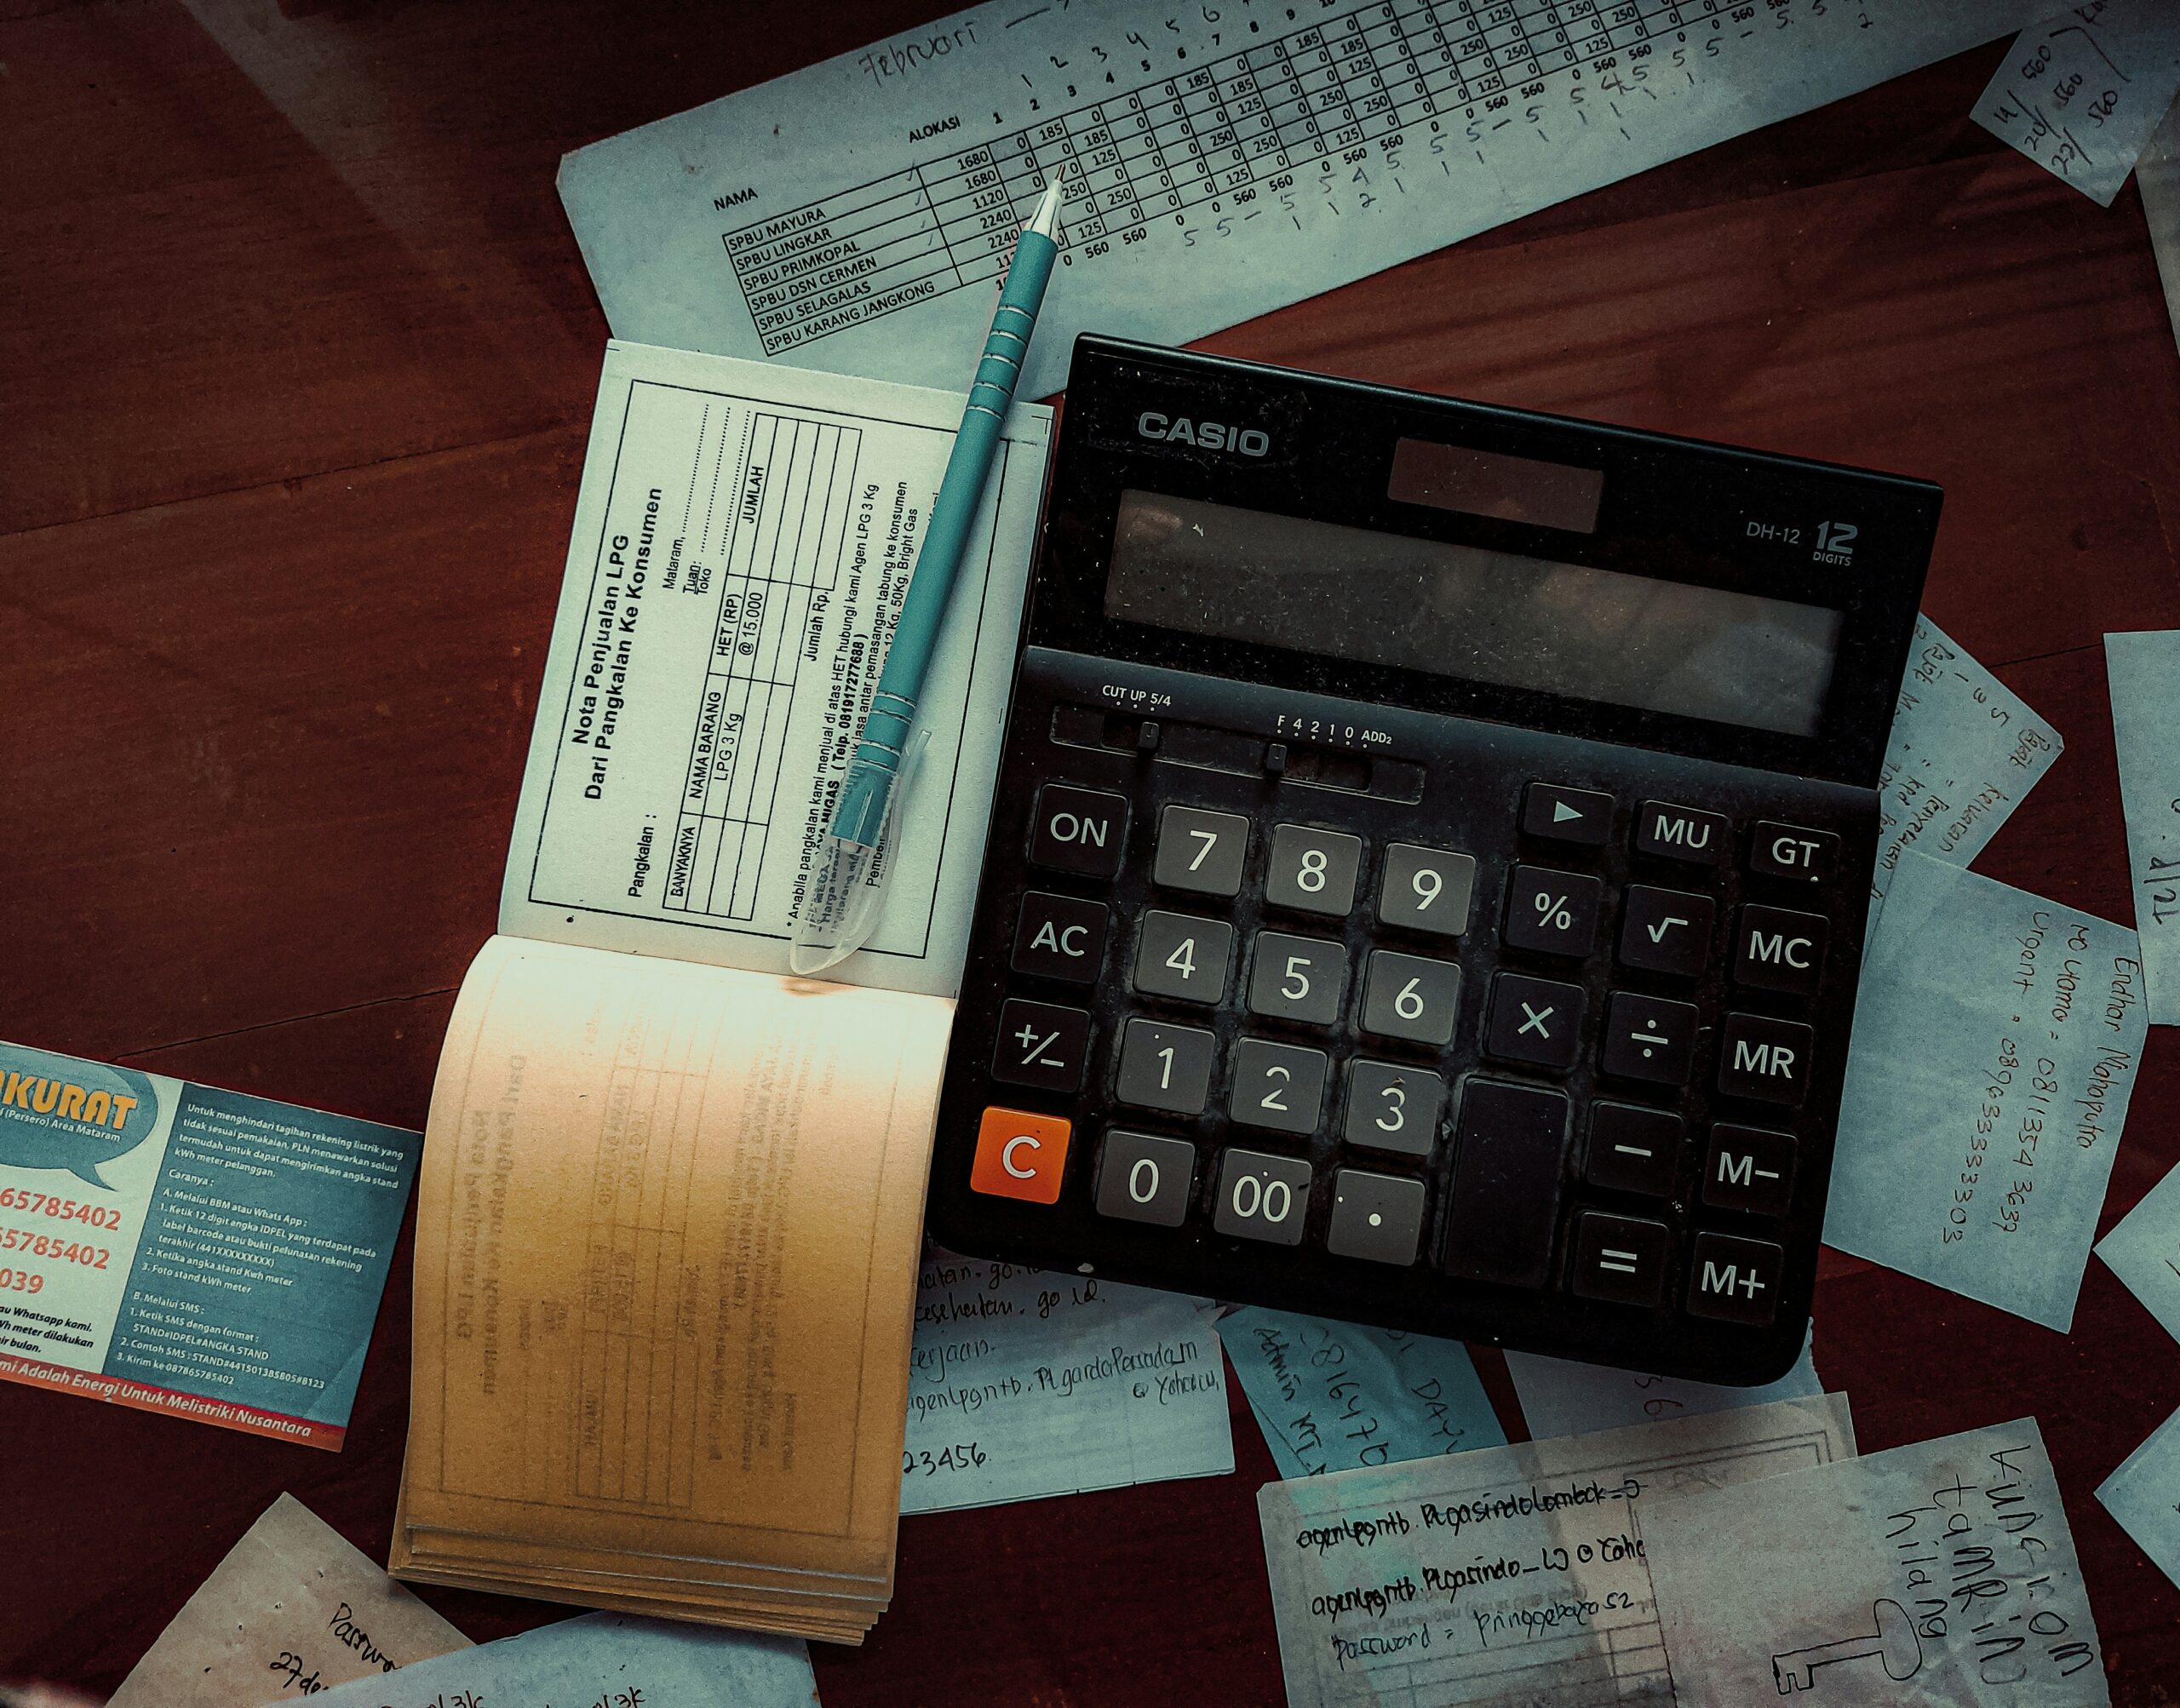 A top view of a desk cluttered with financial documents, receipts, and a large calculator. A pen rests on an open ledger, suggesting accounting or budgeting activities. The scene conveys a sense of meticulous financial management and record-keeping.